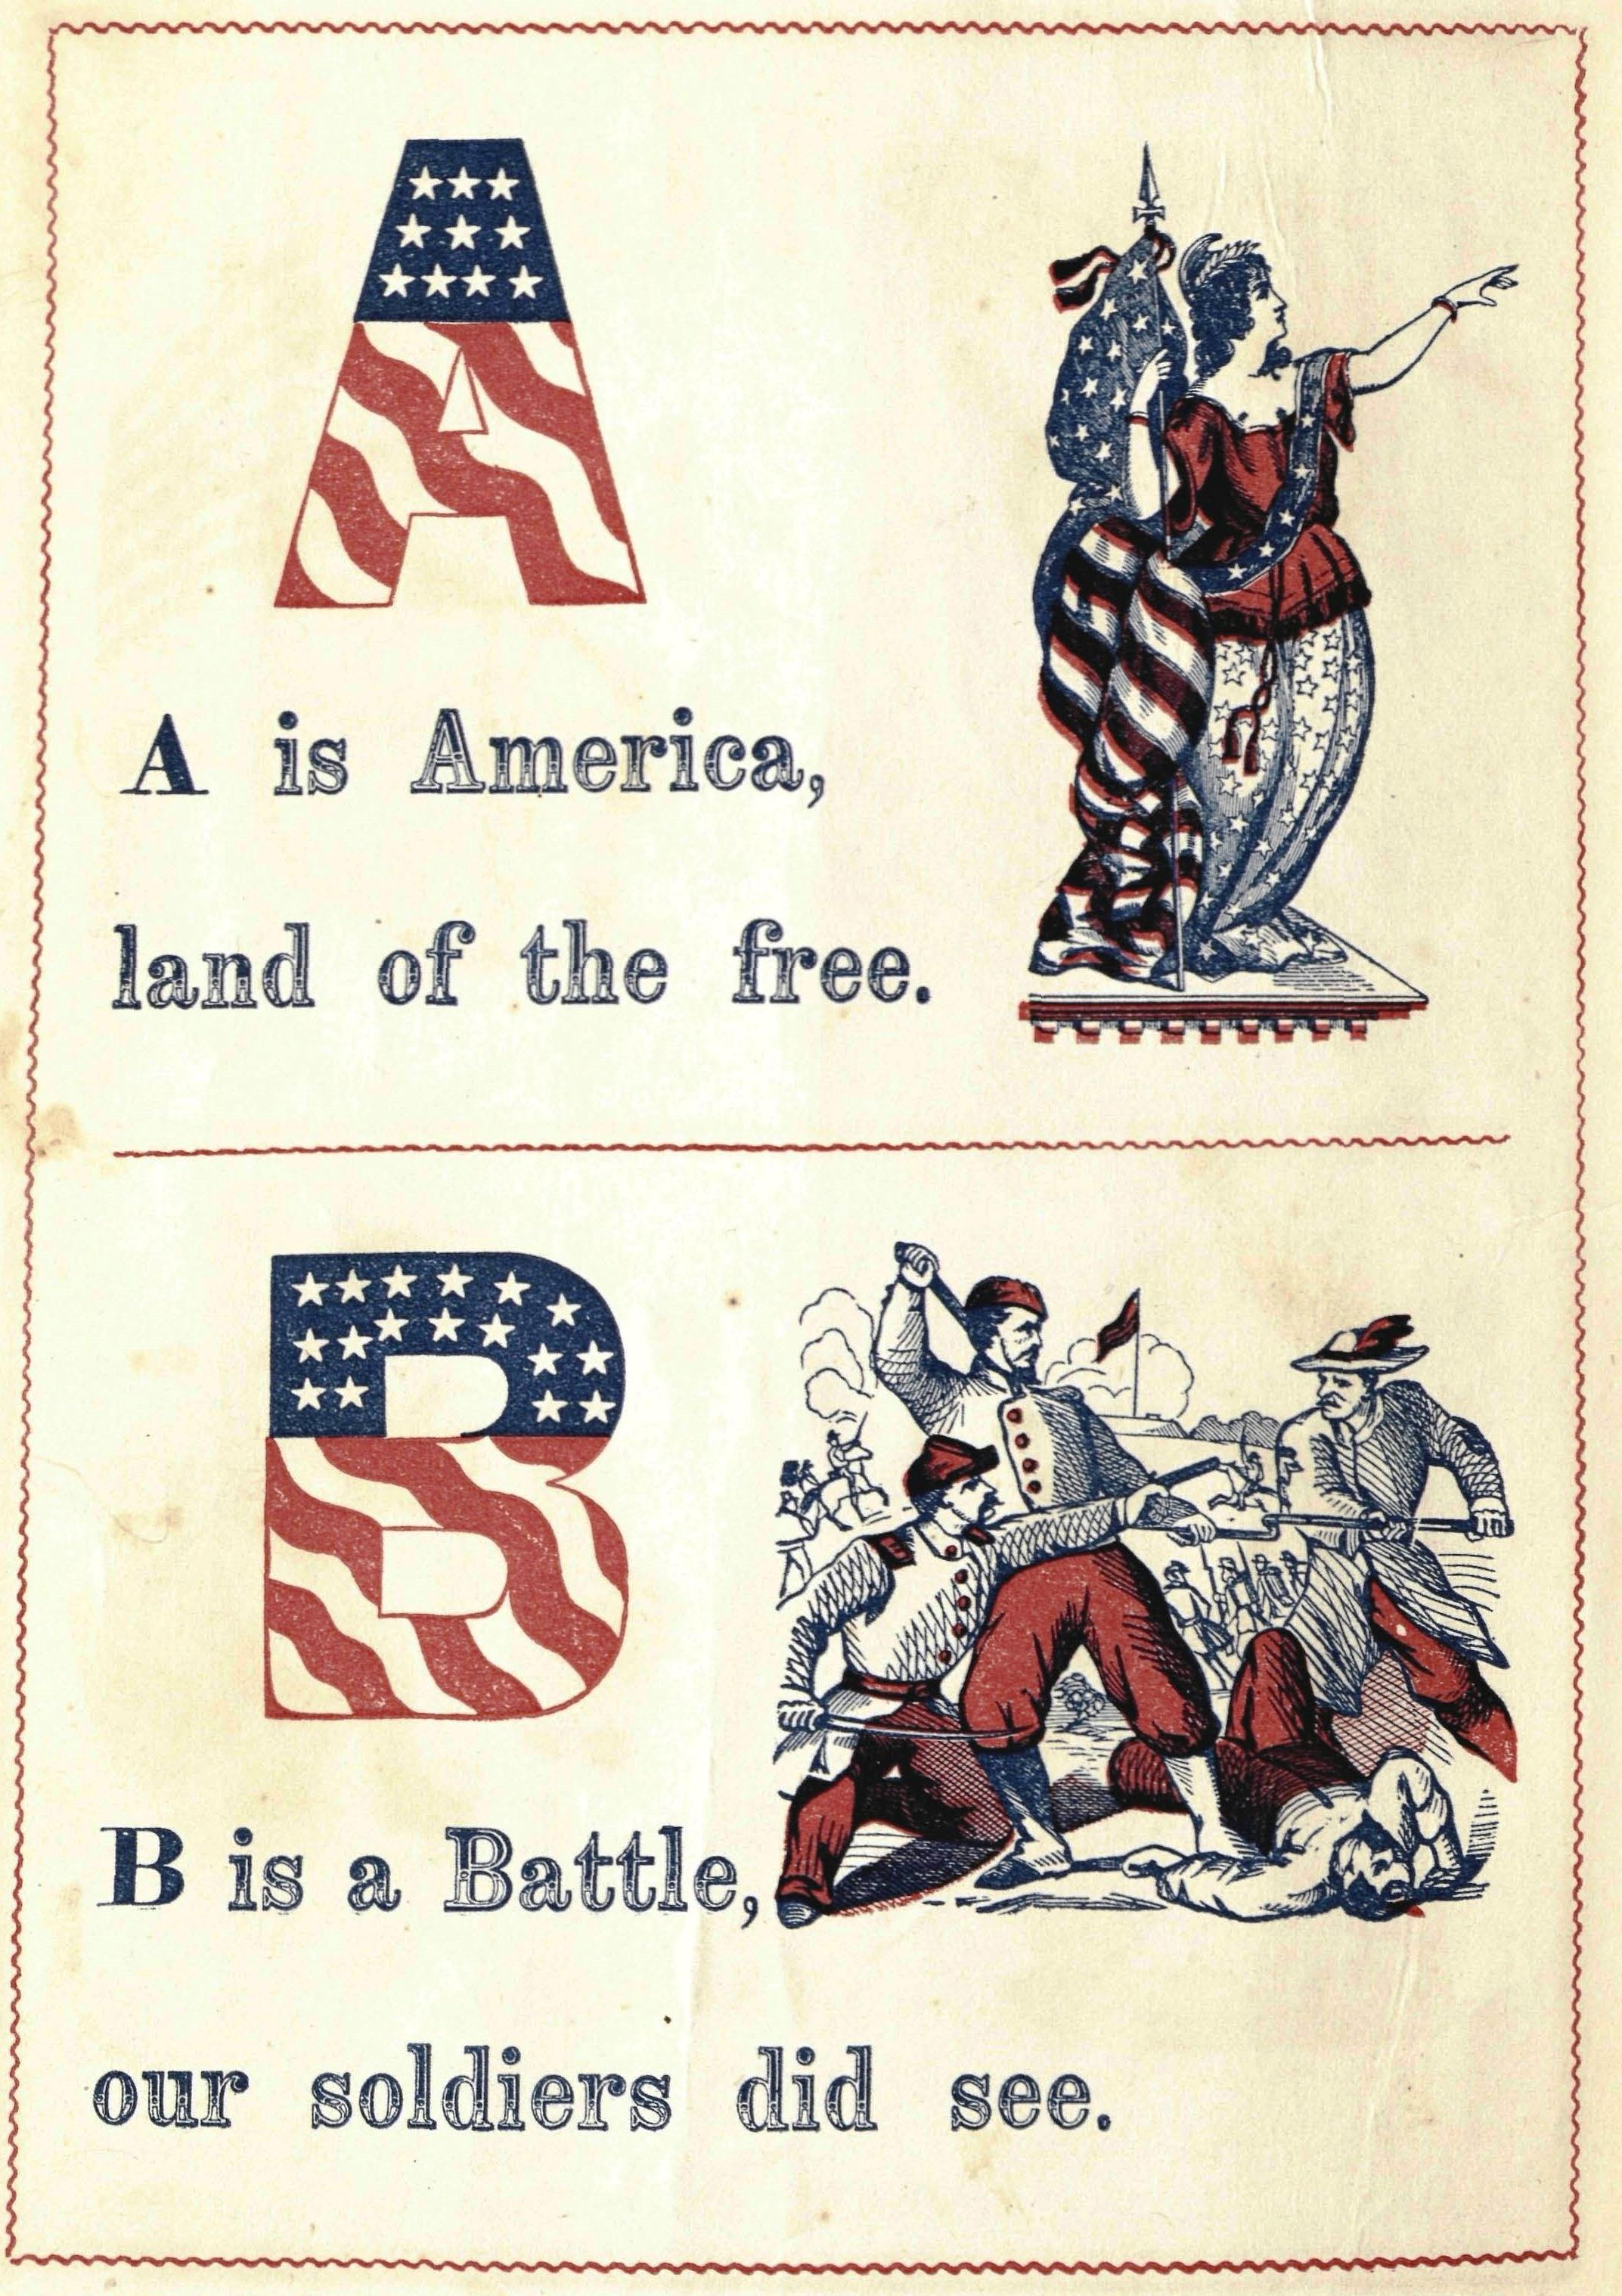 From The American Civil War Collection